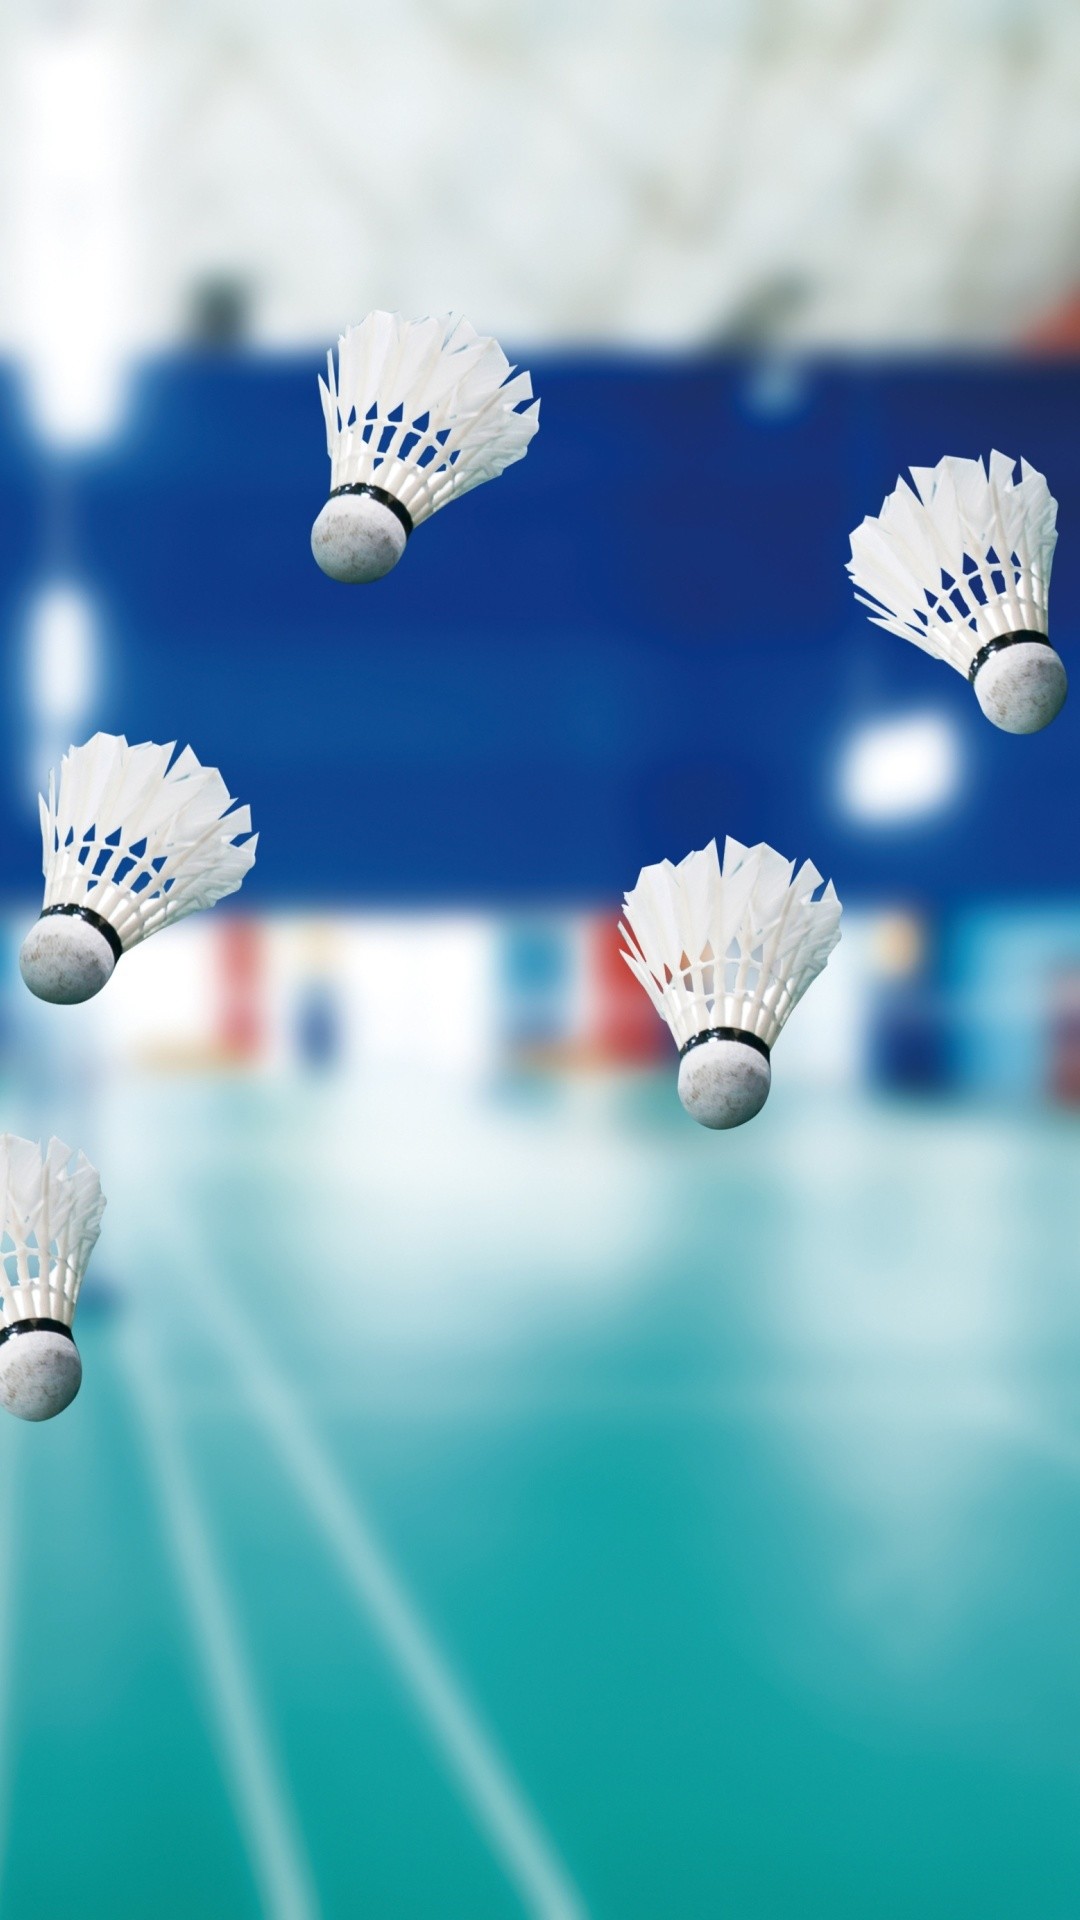 Badminton Cell Phone Wallpaper Images Free Download on Lovepik | 400337034